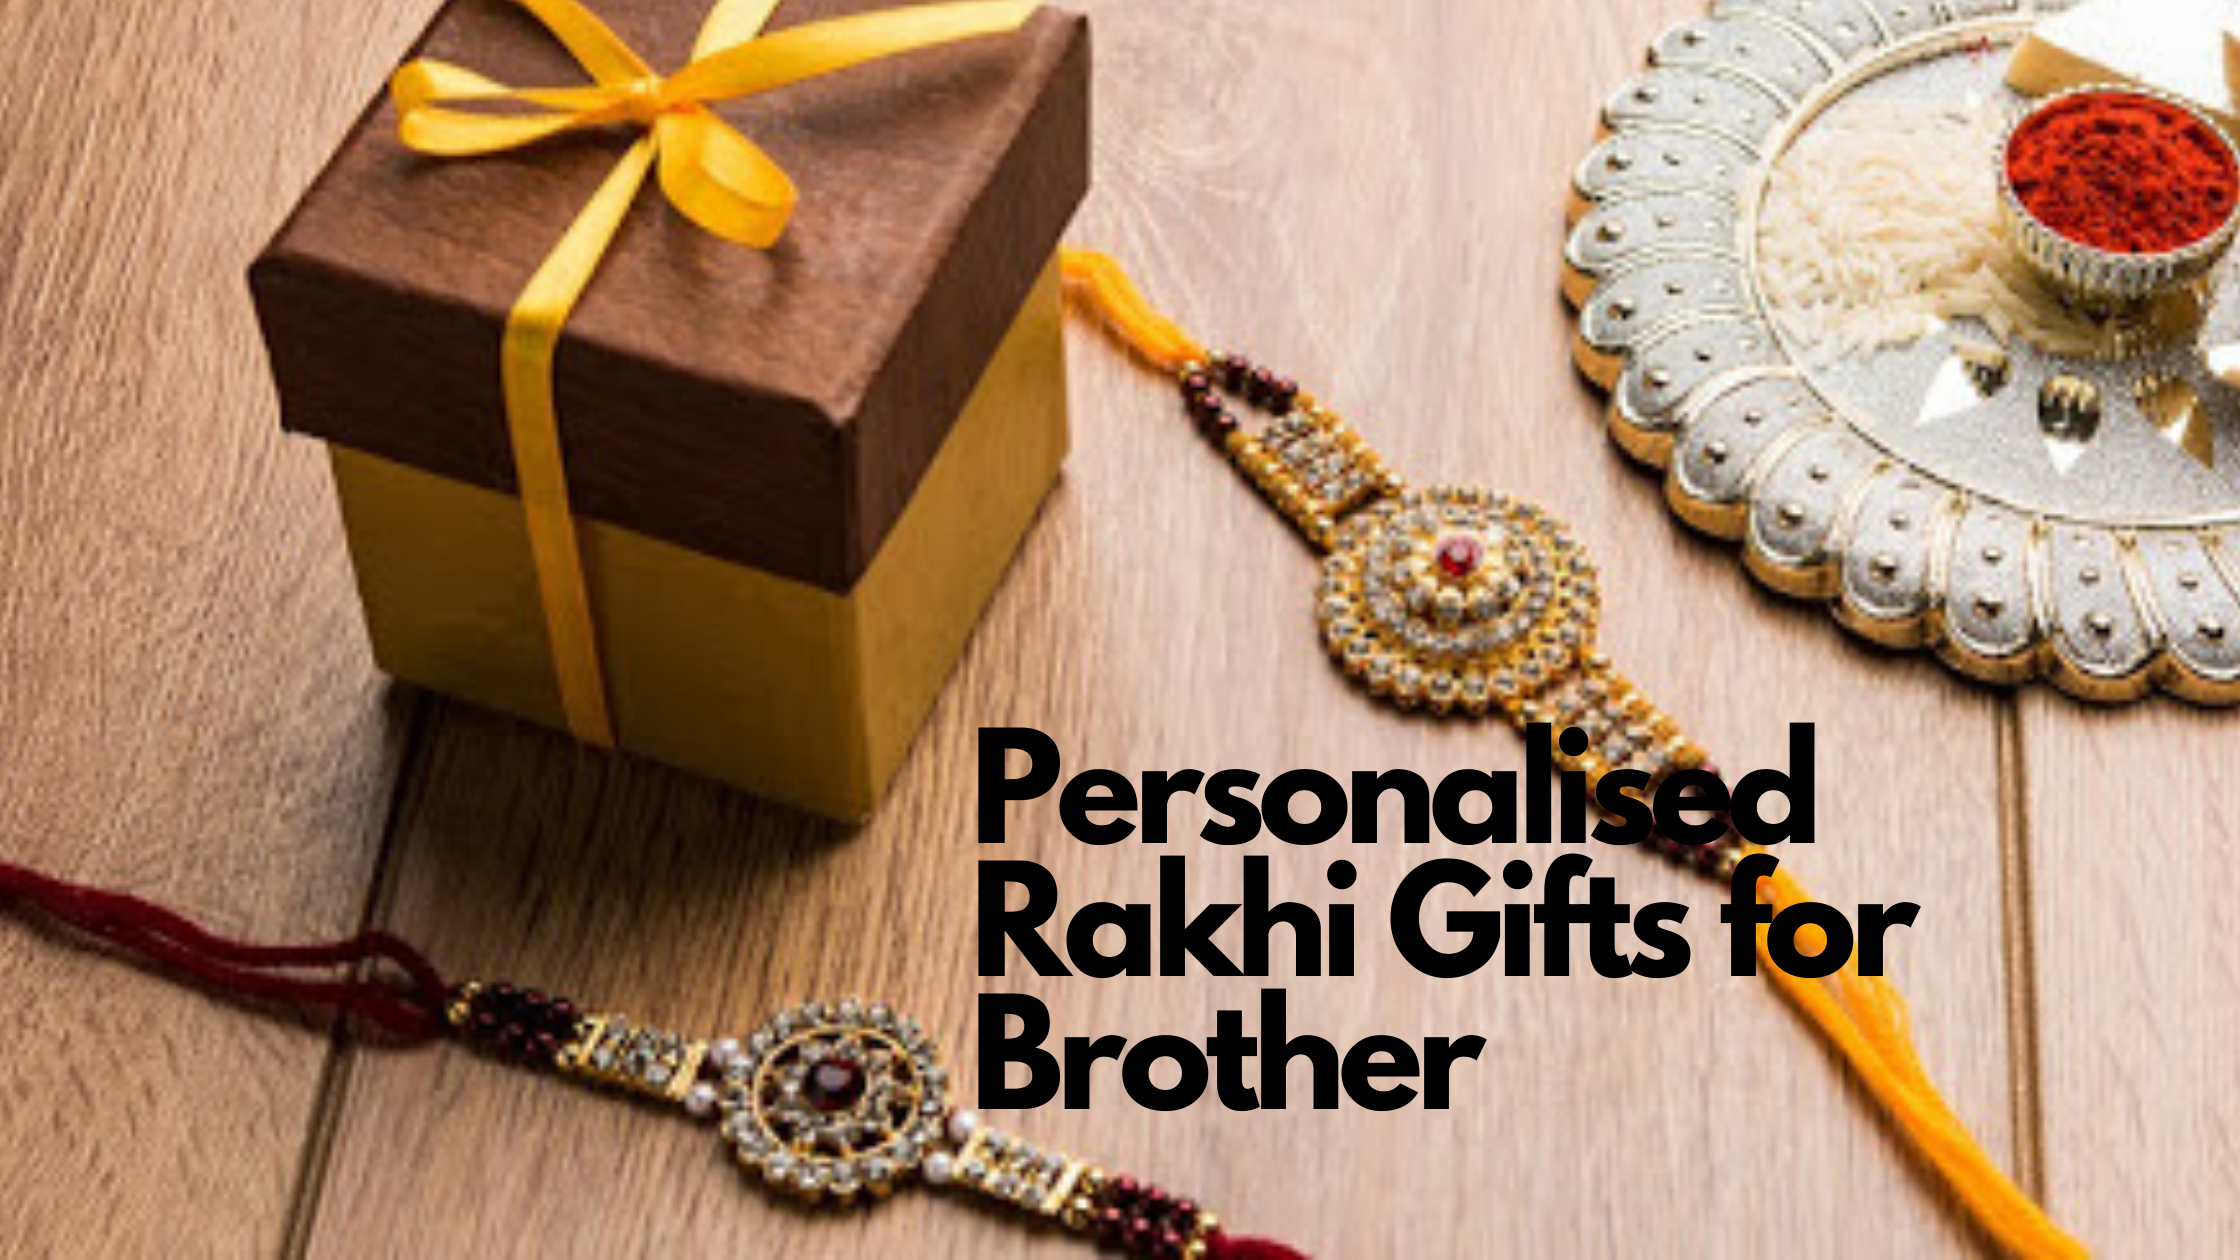 Personalized Rakhi and dryfruit Combo Gifts for Brother - Raksha bandhan  chocolate gift for bro : Amazon.in: Grocery & Gourmet Foods